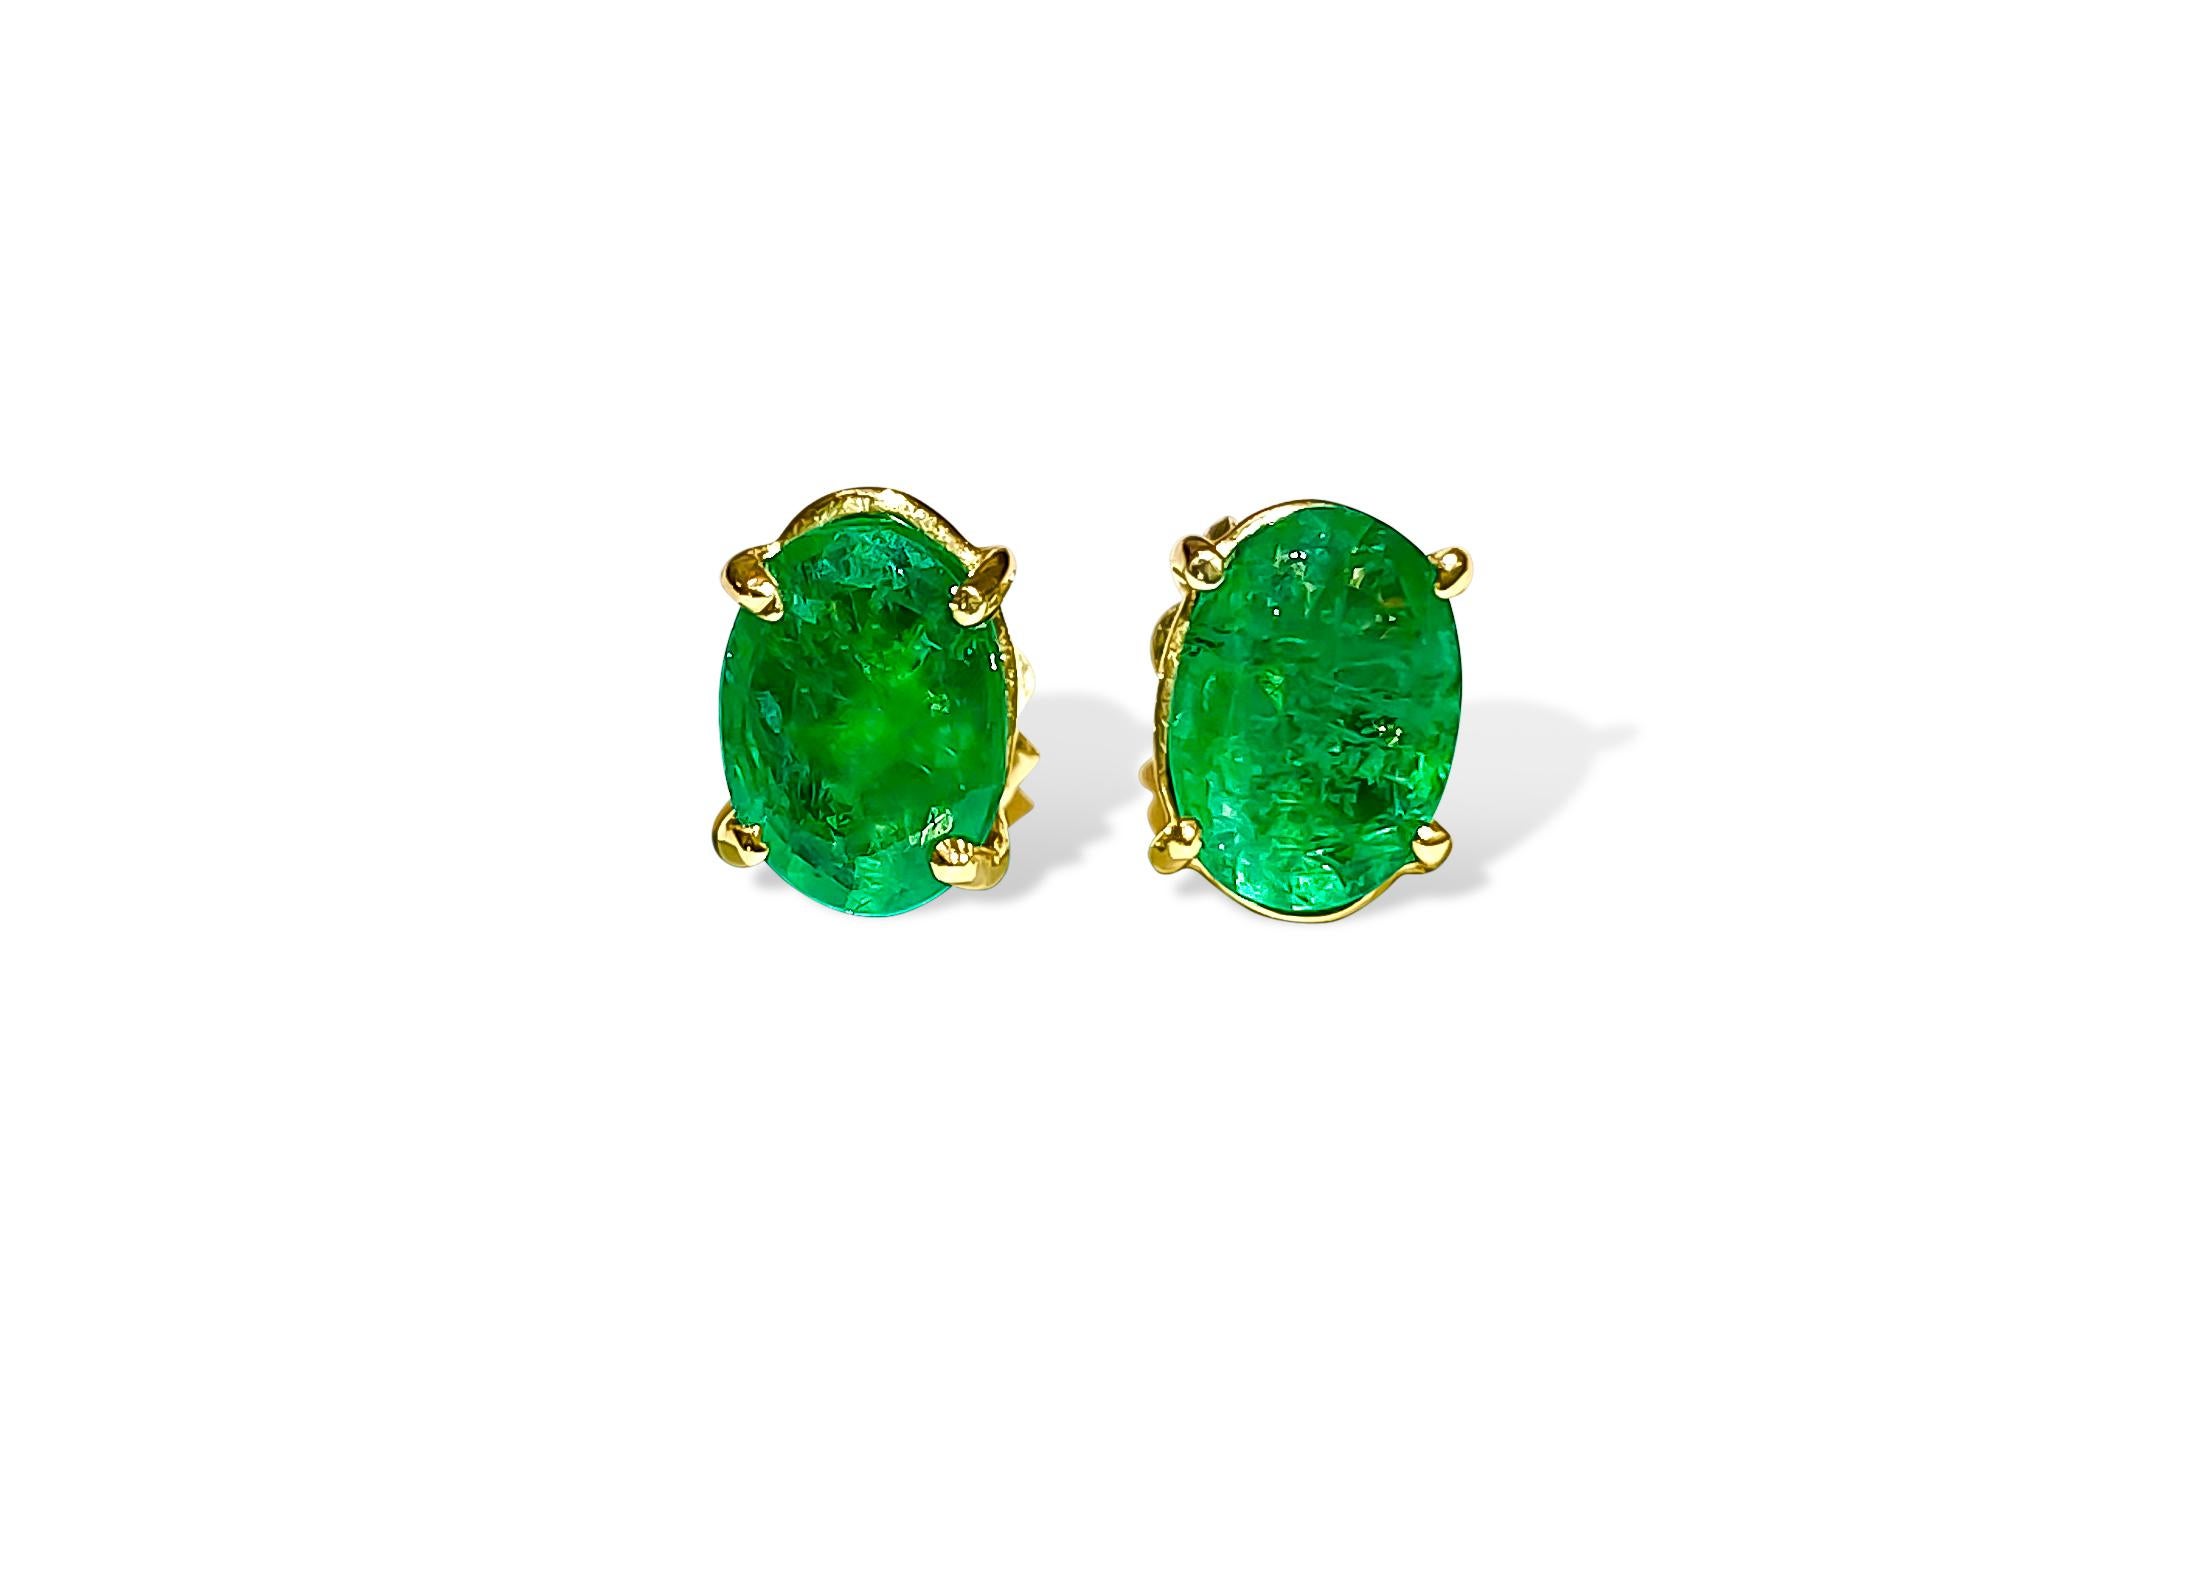 Metal: 14K yellow gold. 
TCW of emeralds: 2.00cts. 
Oval shape set in prongs. 
100% natural earth mined emerald. 
Saturation and color: Excellent. 
Butterfly push back studs. 
Perfect emerald and gold studs for her.

Fashioned from elegant 14K